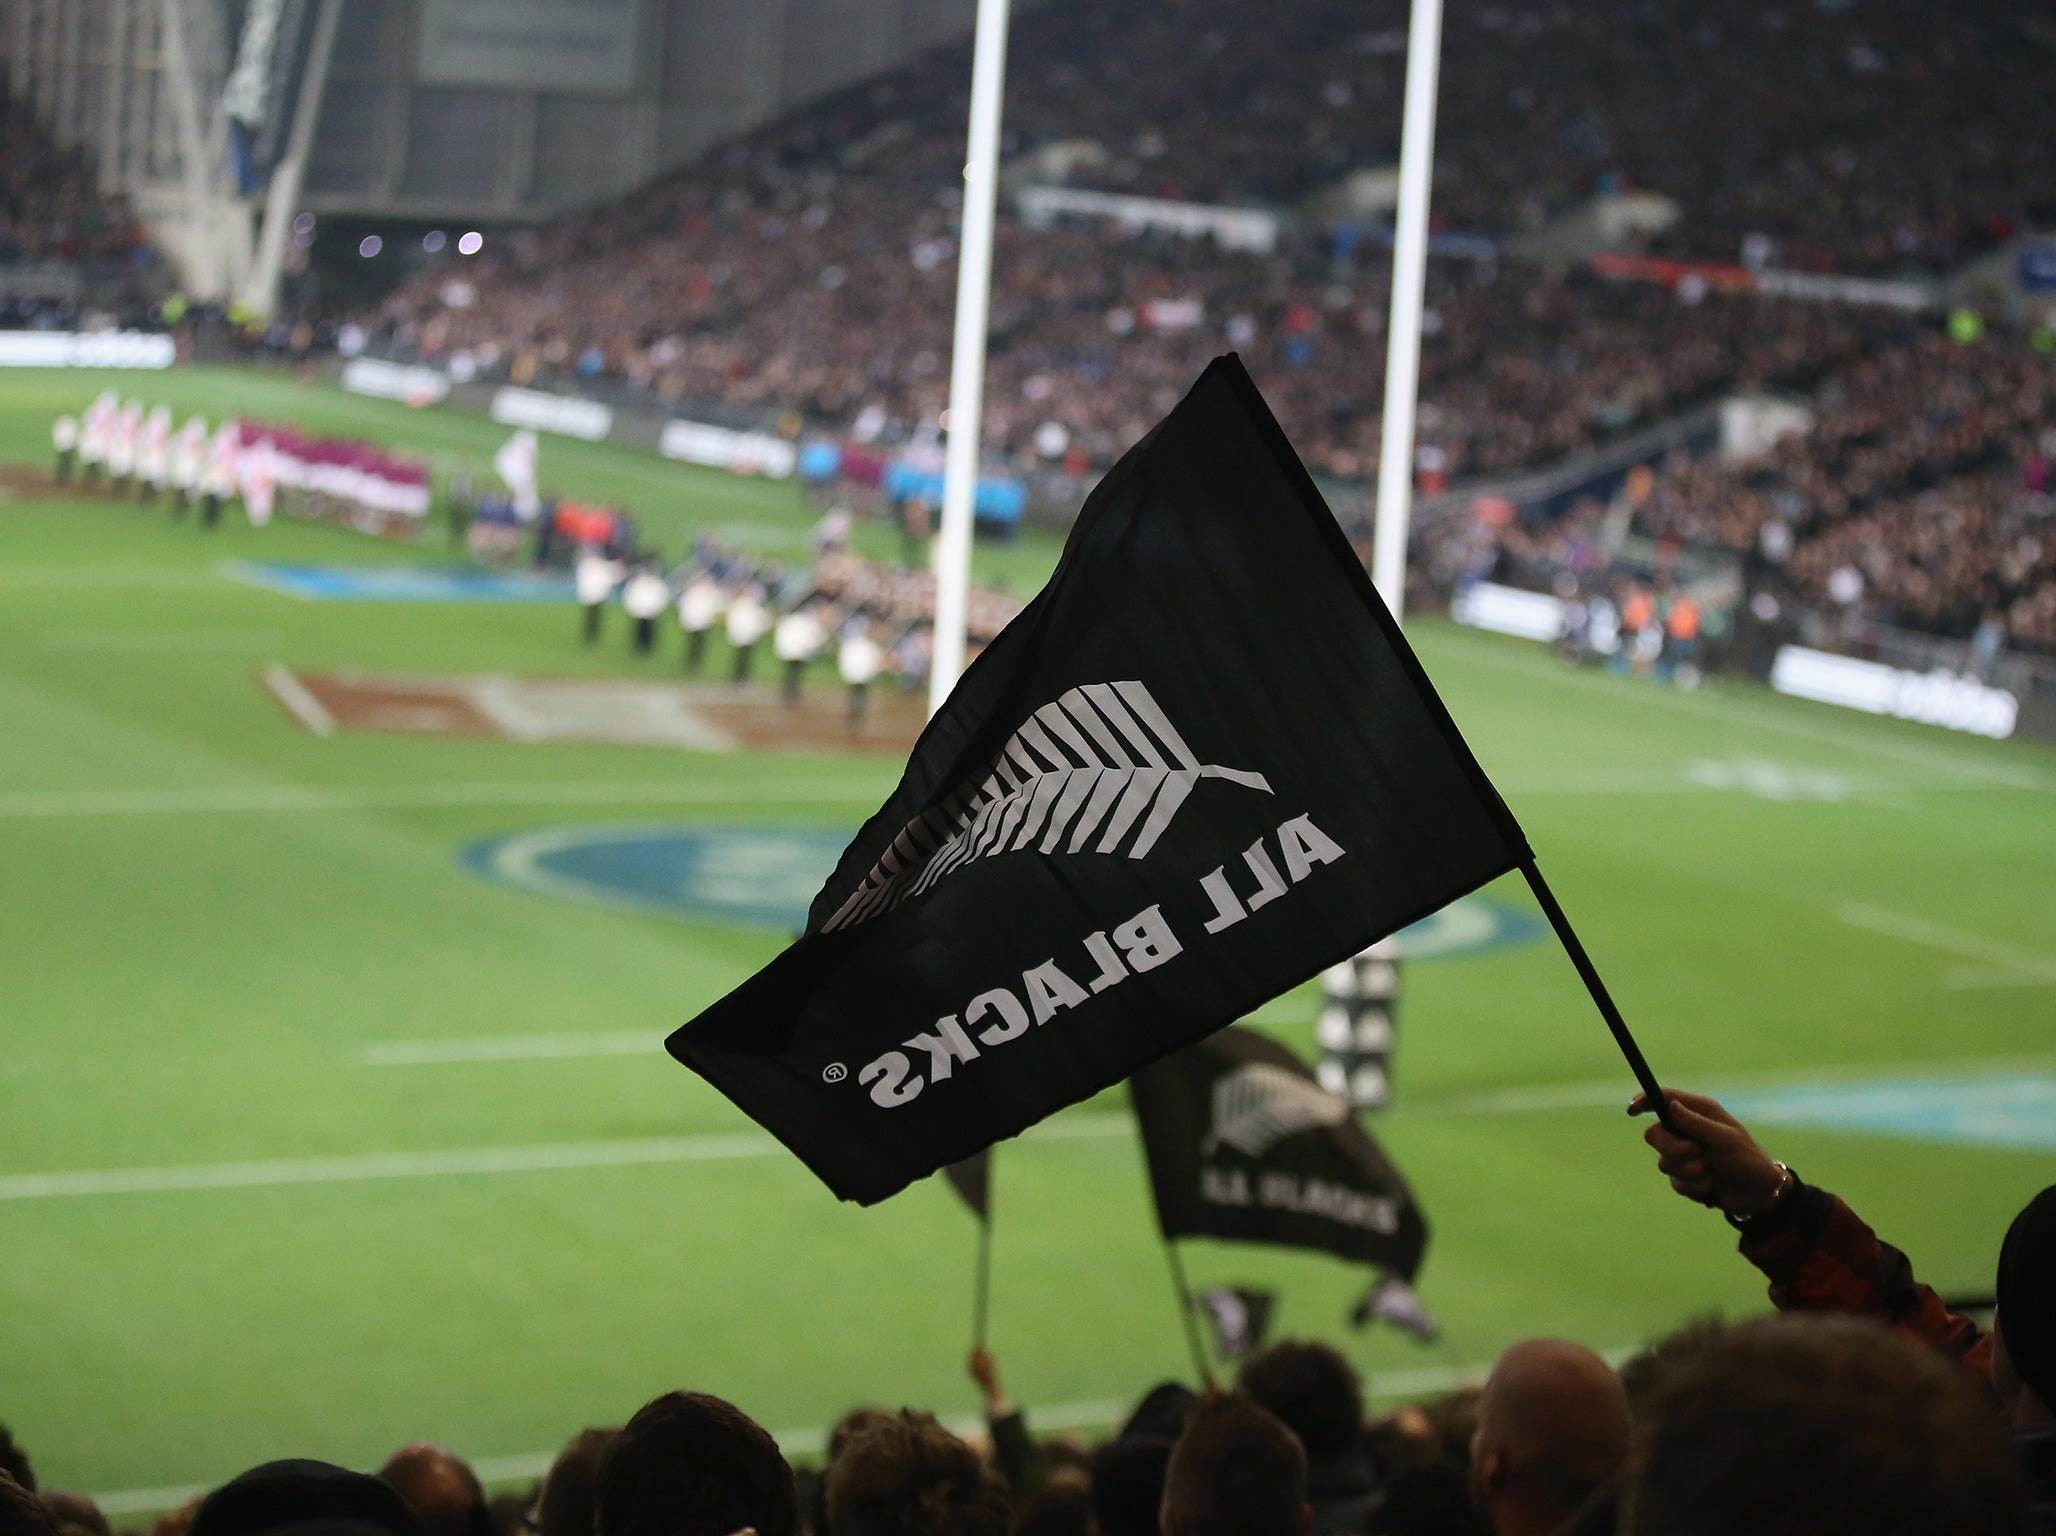 Four New Zealand rugby players have been suspended